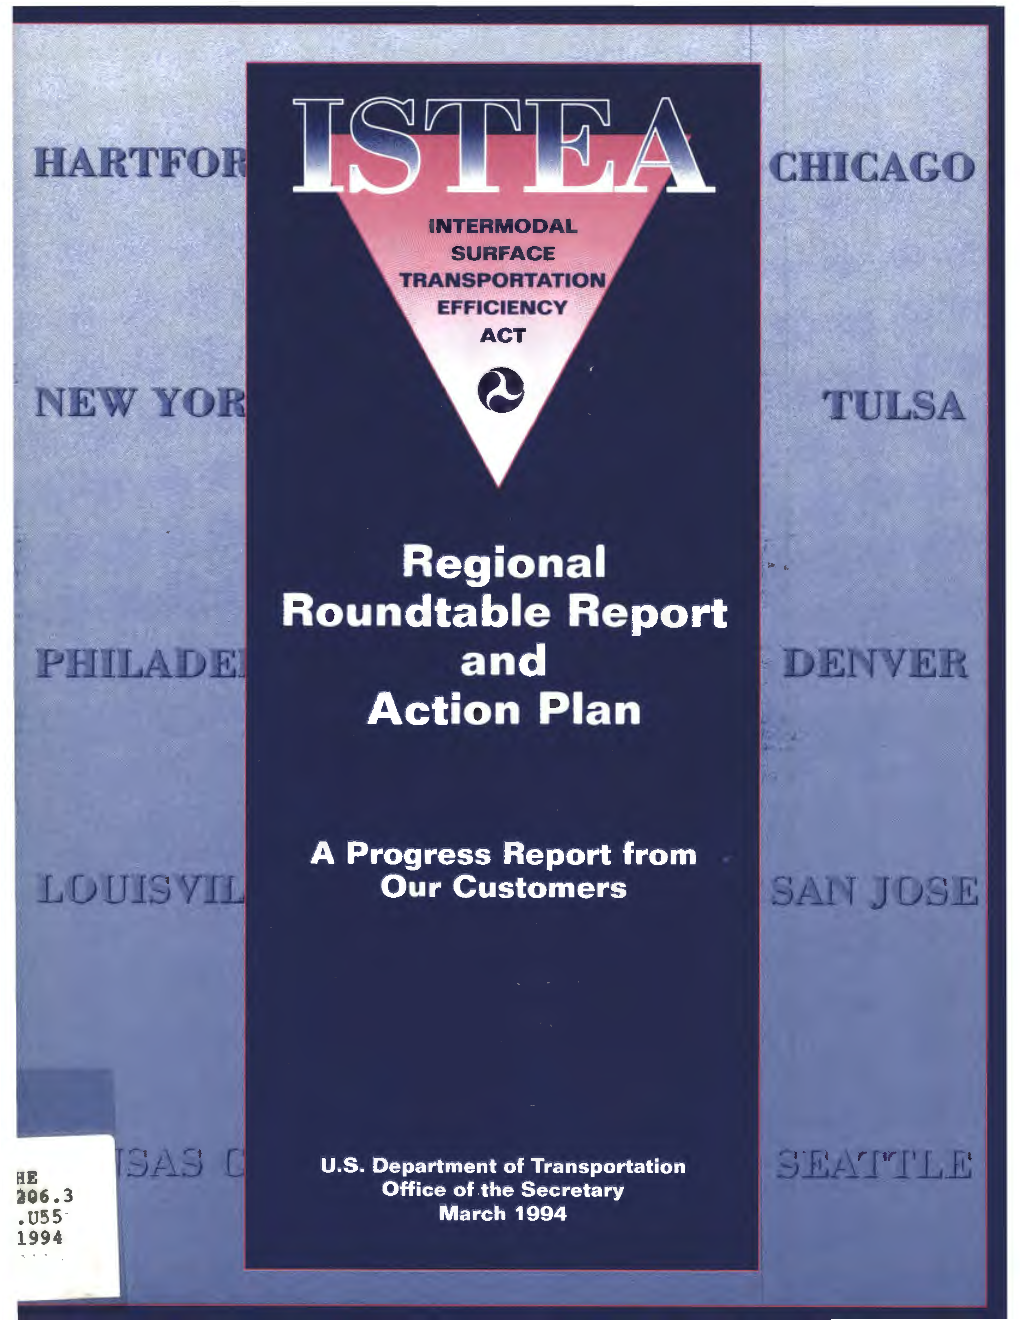 ISTEA Regional Roundtable Report and Action Plan March 1994